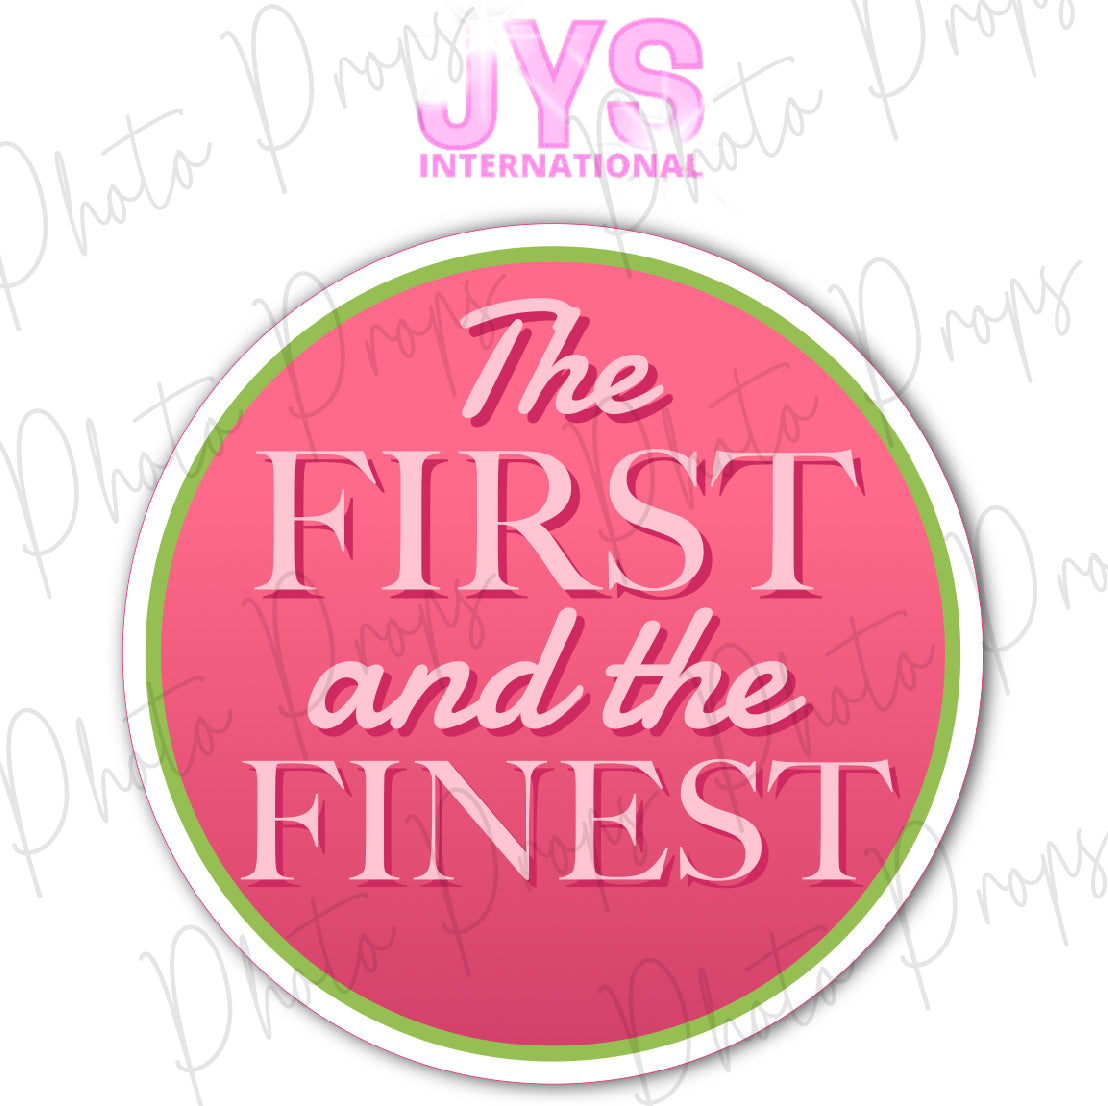 P1236: AKA FIRST AND FINEST